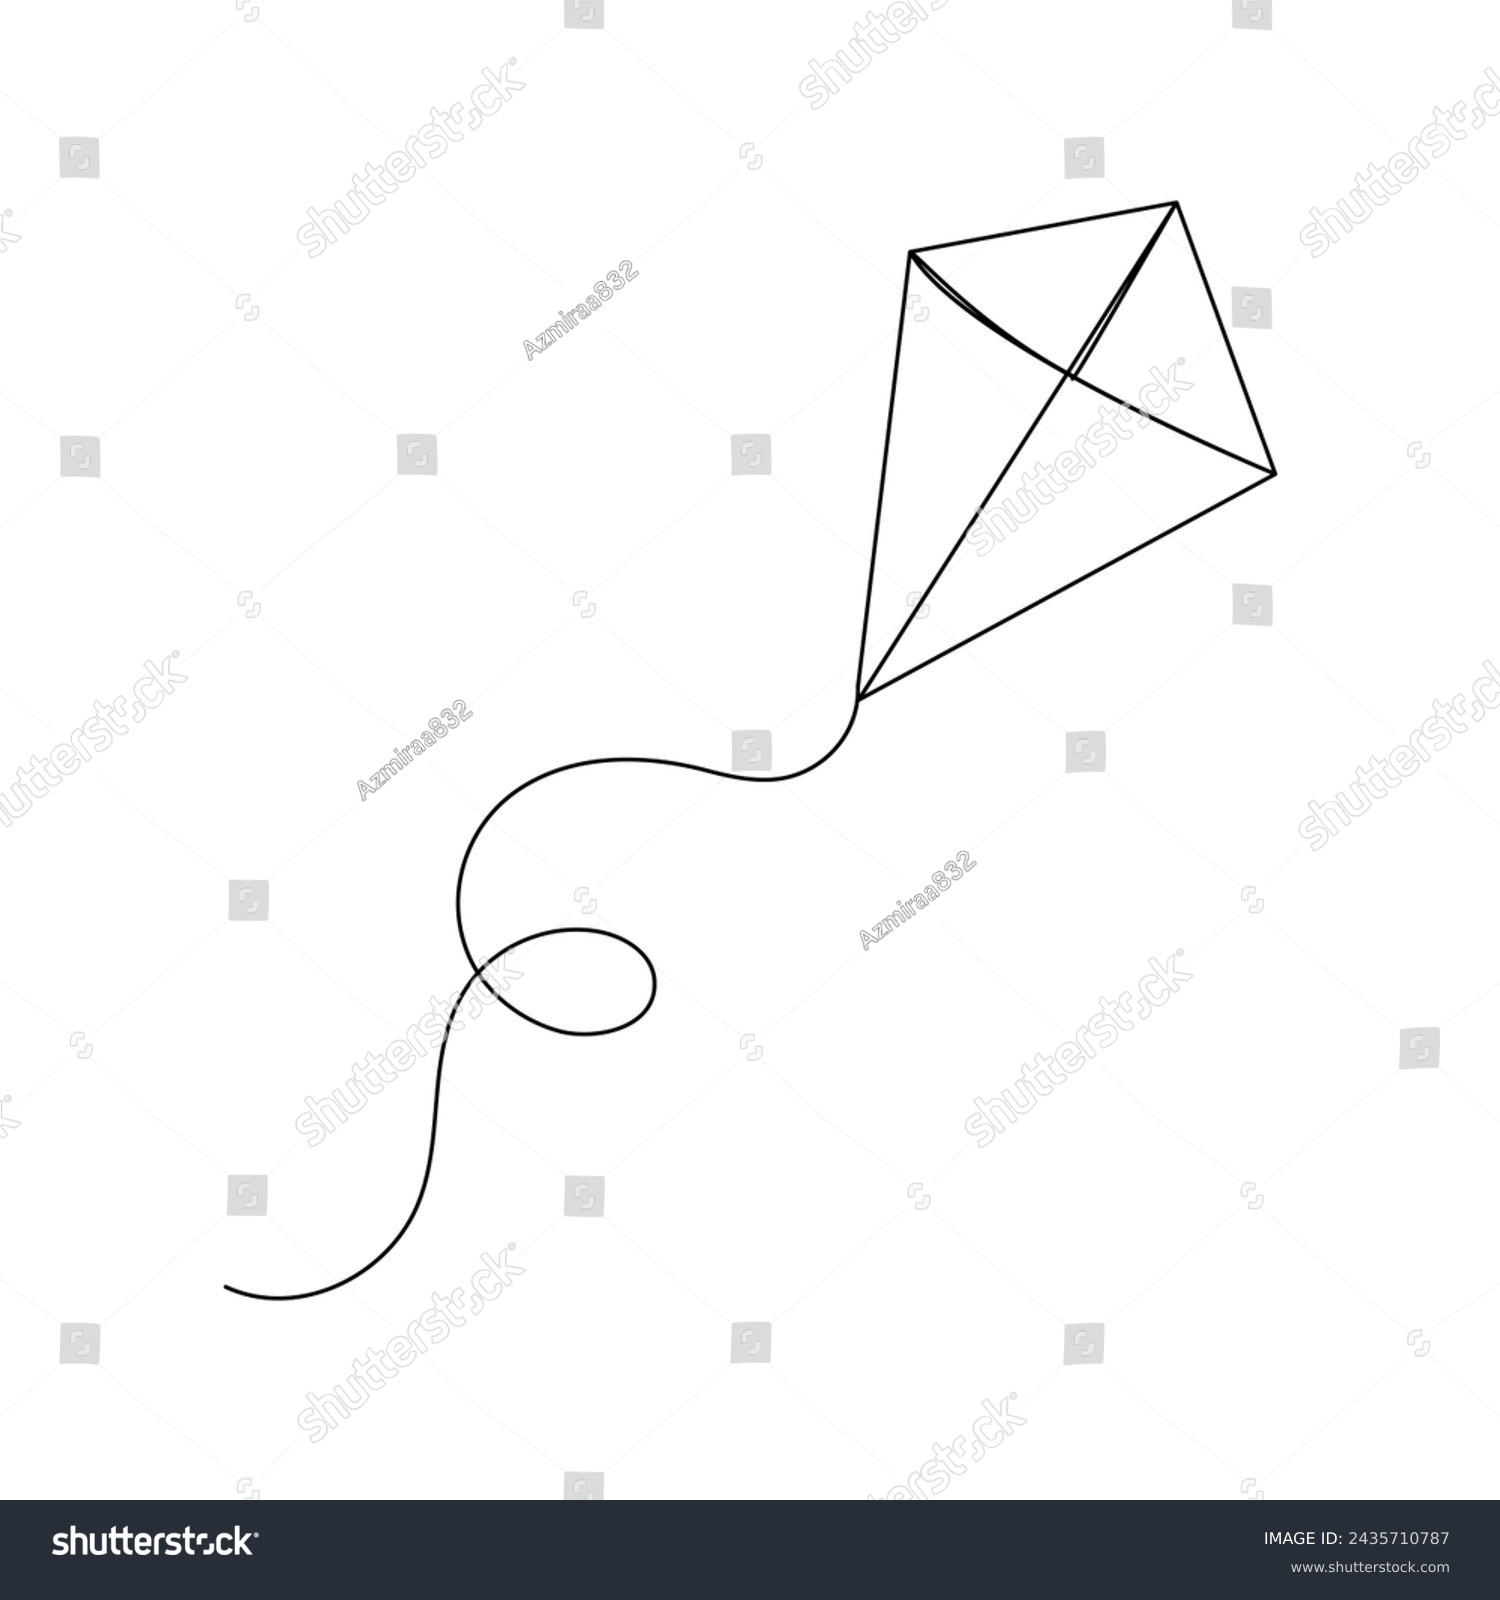 SVG of Kite   continuous one line drawing of outline vector illustration
 svg